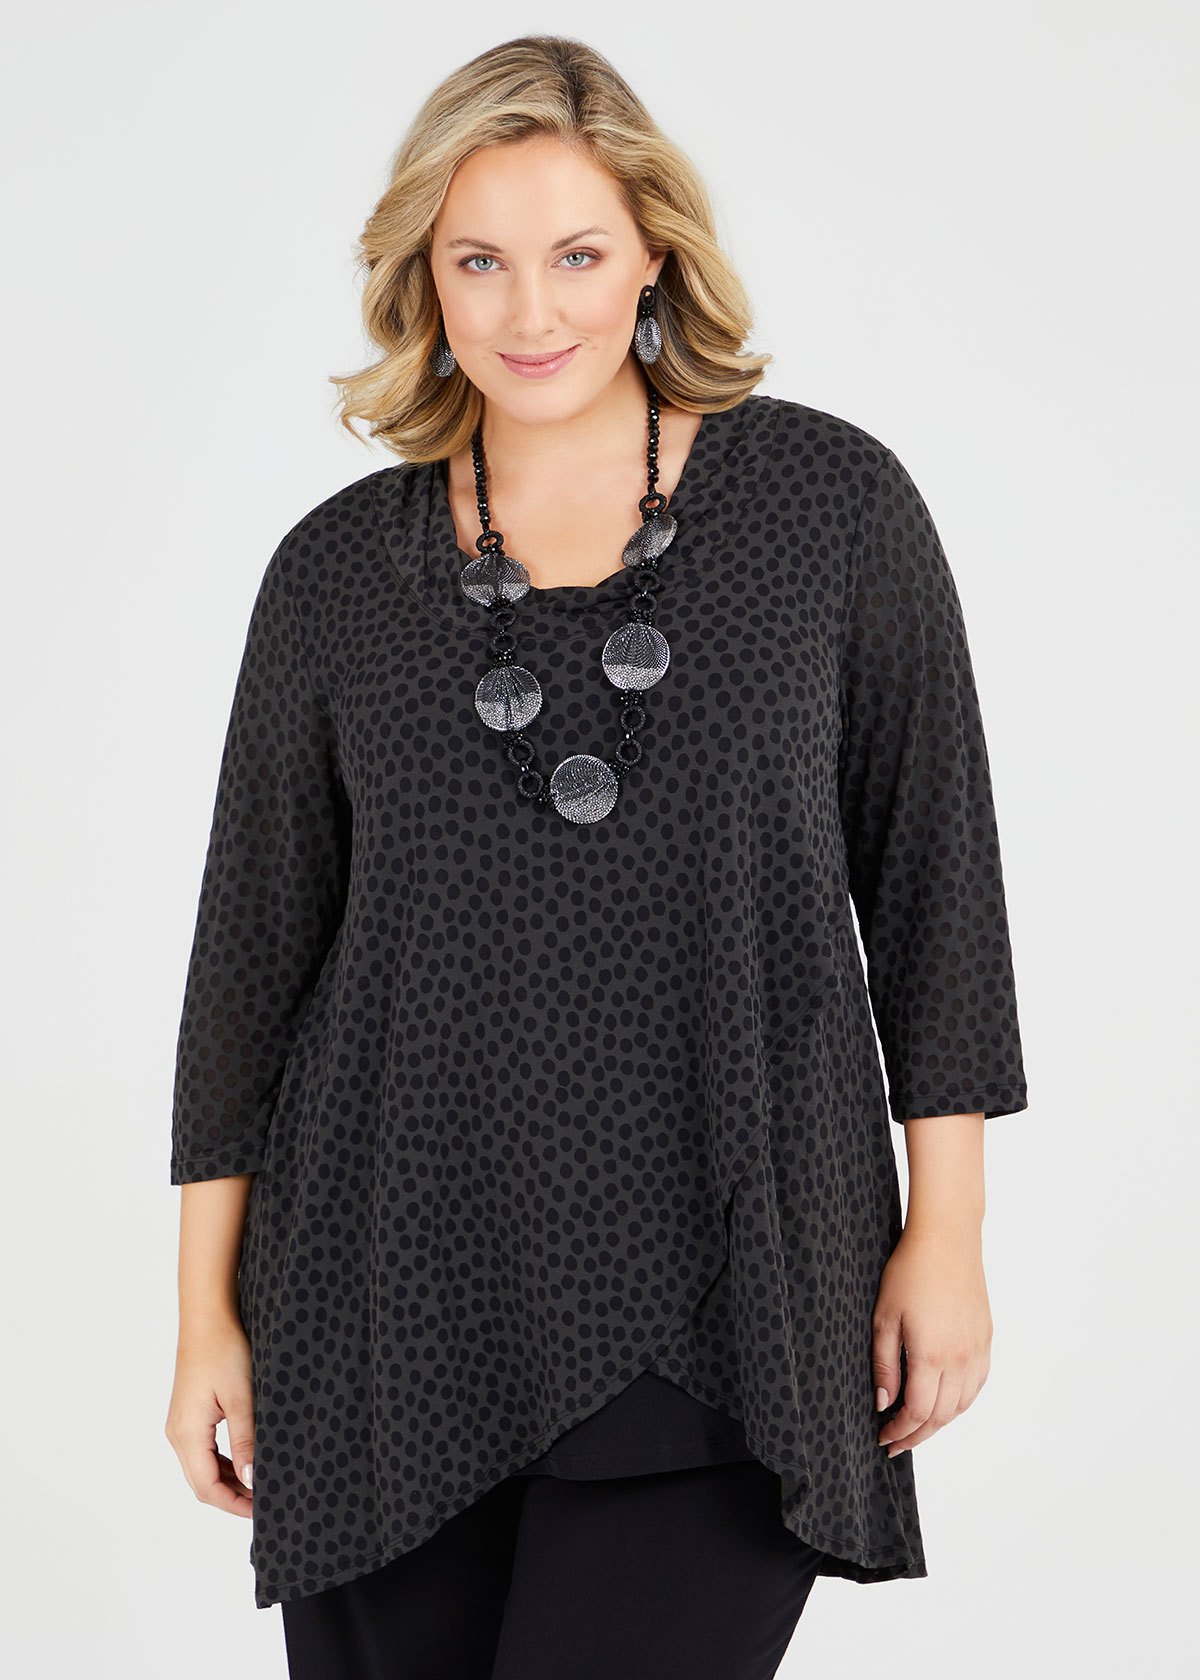 Shop Back To Nature Top in Black in sizes 12 to 30 | Taking Shape AU